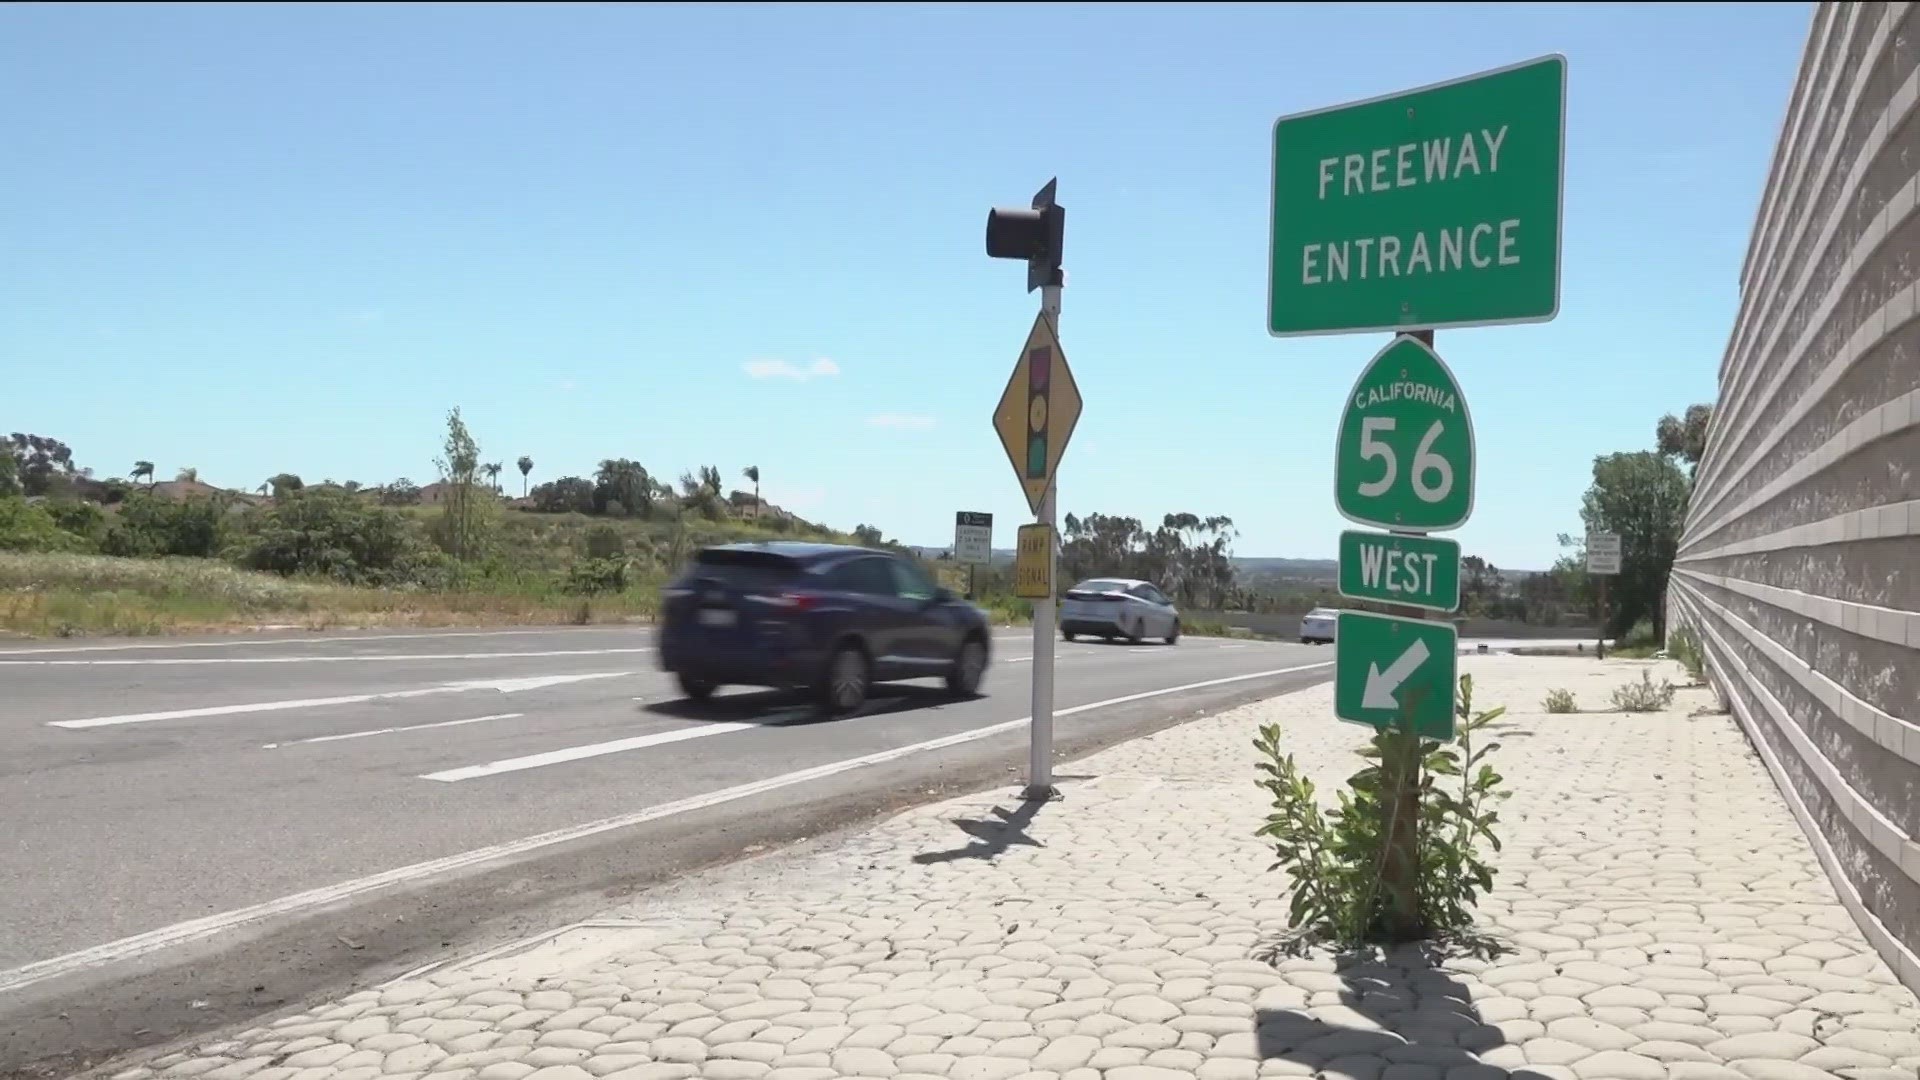 State Route 56 will extend freeway by adding carpool lanes.